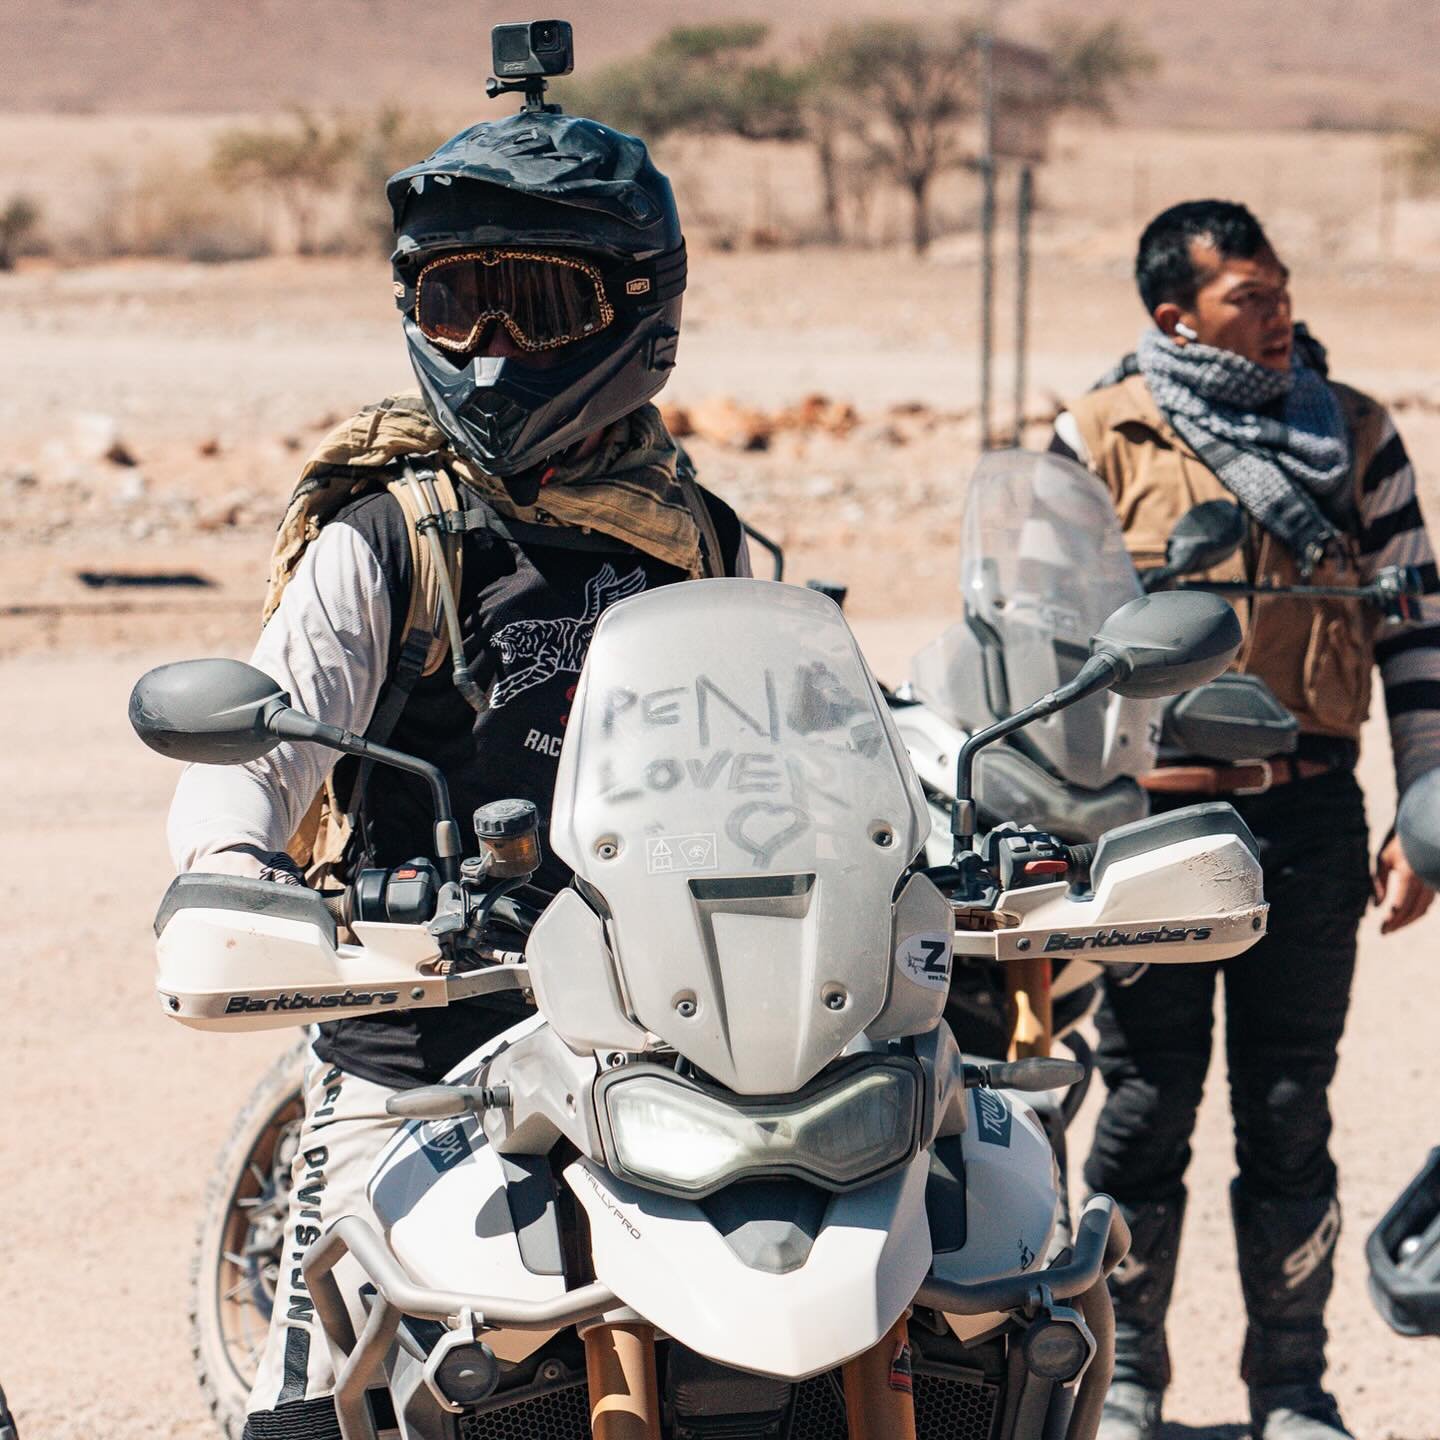 Thinking about bringing your own bike to Namibia?

No problem! SADC Rates are available for South African residents looking to take their own bike.

Bike transport from JHB -&gt; Windhoek &amp; Cape Town -&gt; JHB is included in your ticket 🤙

Link 